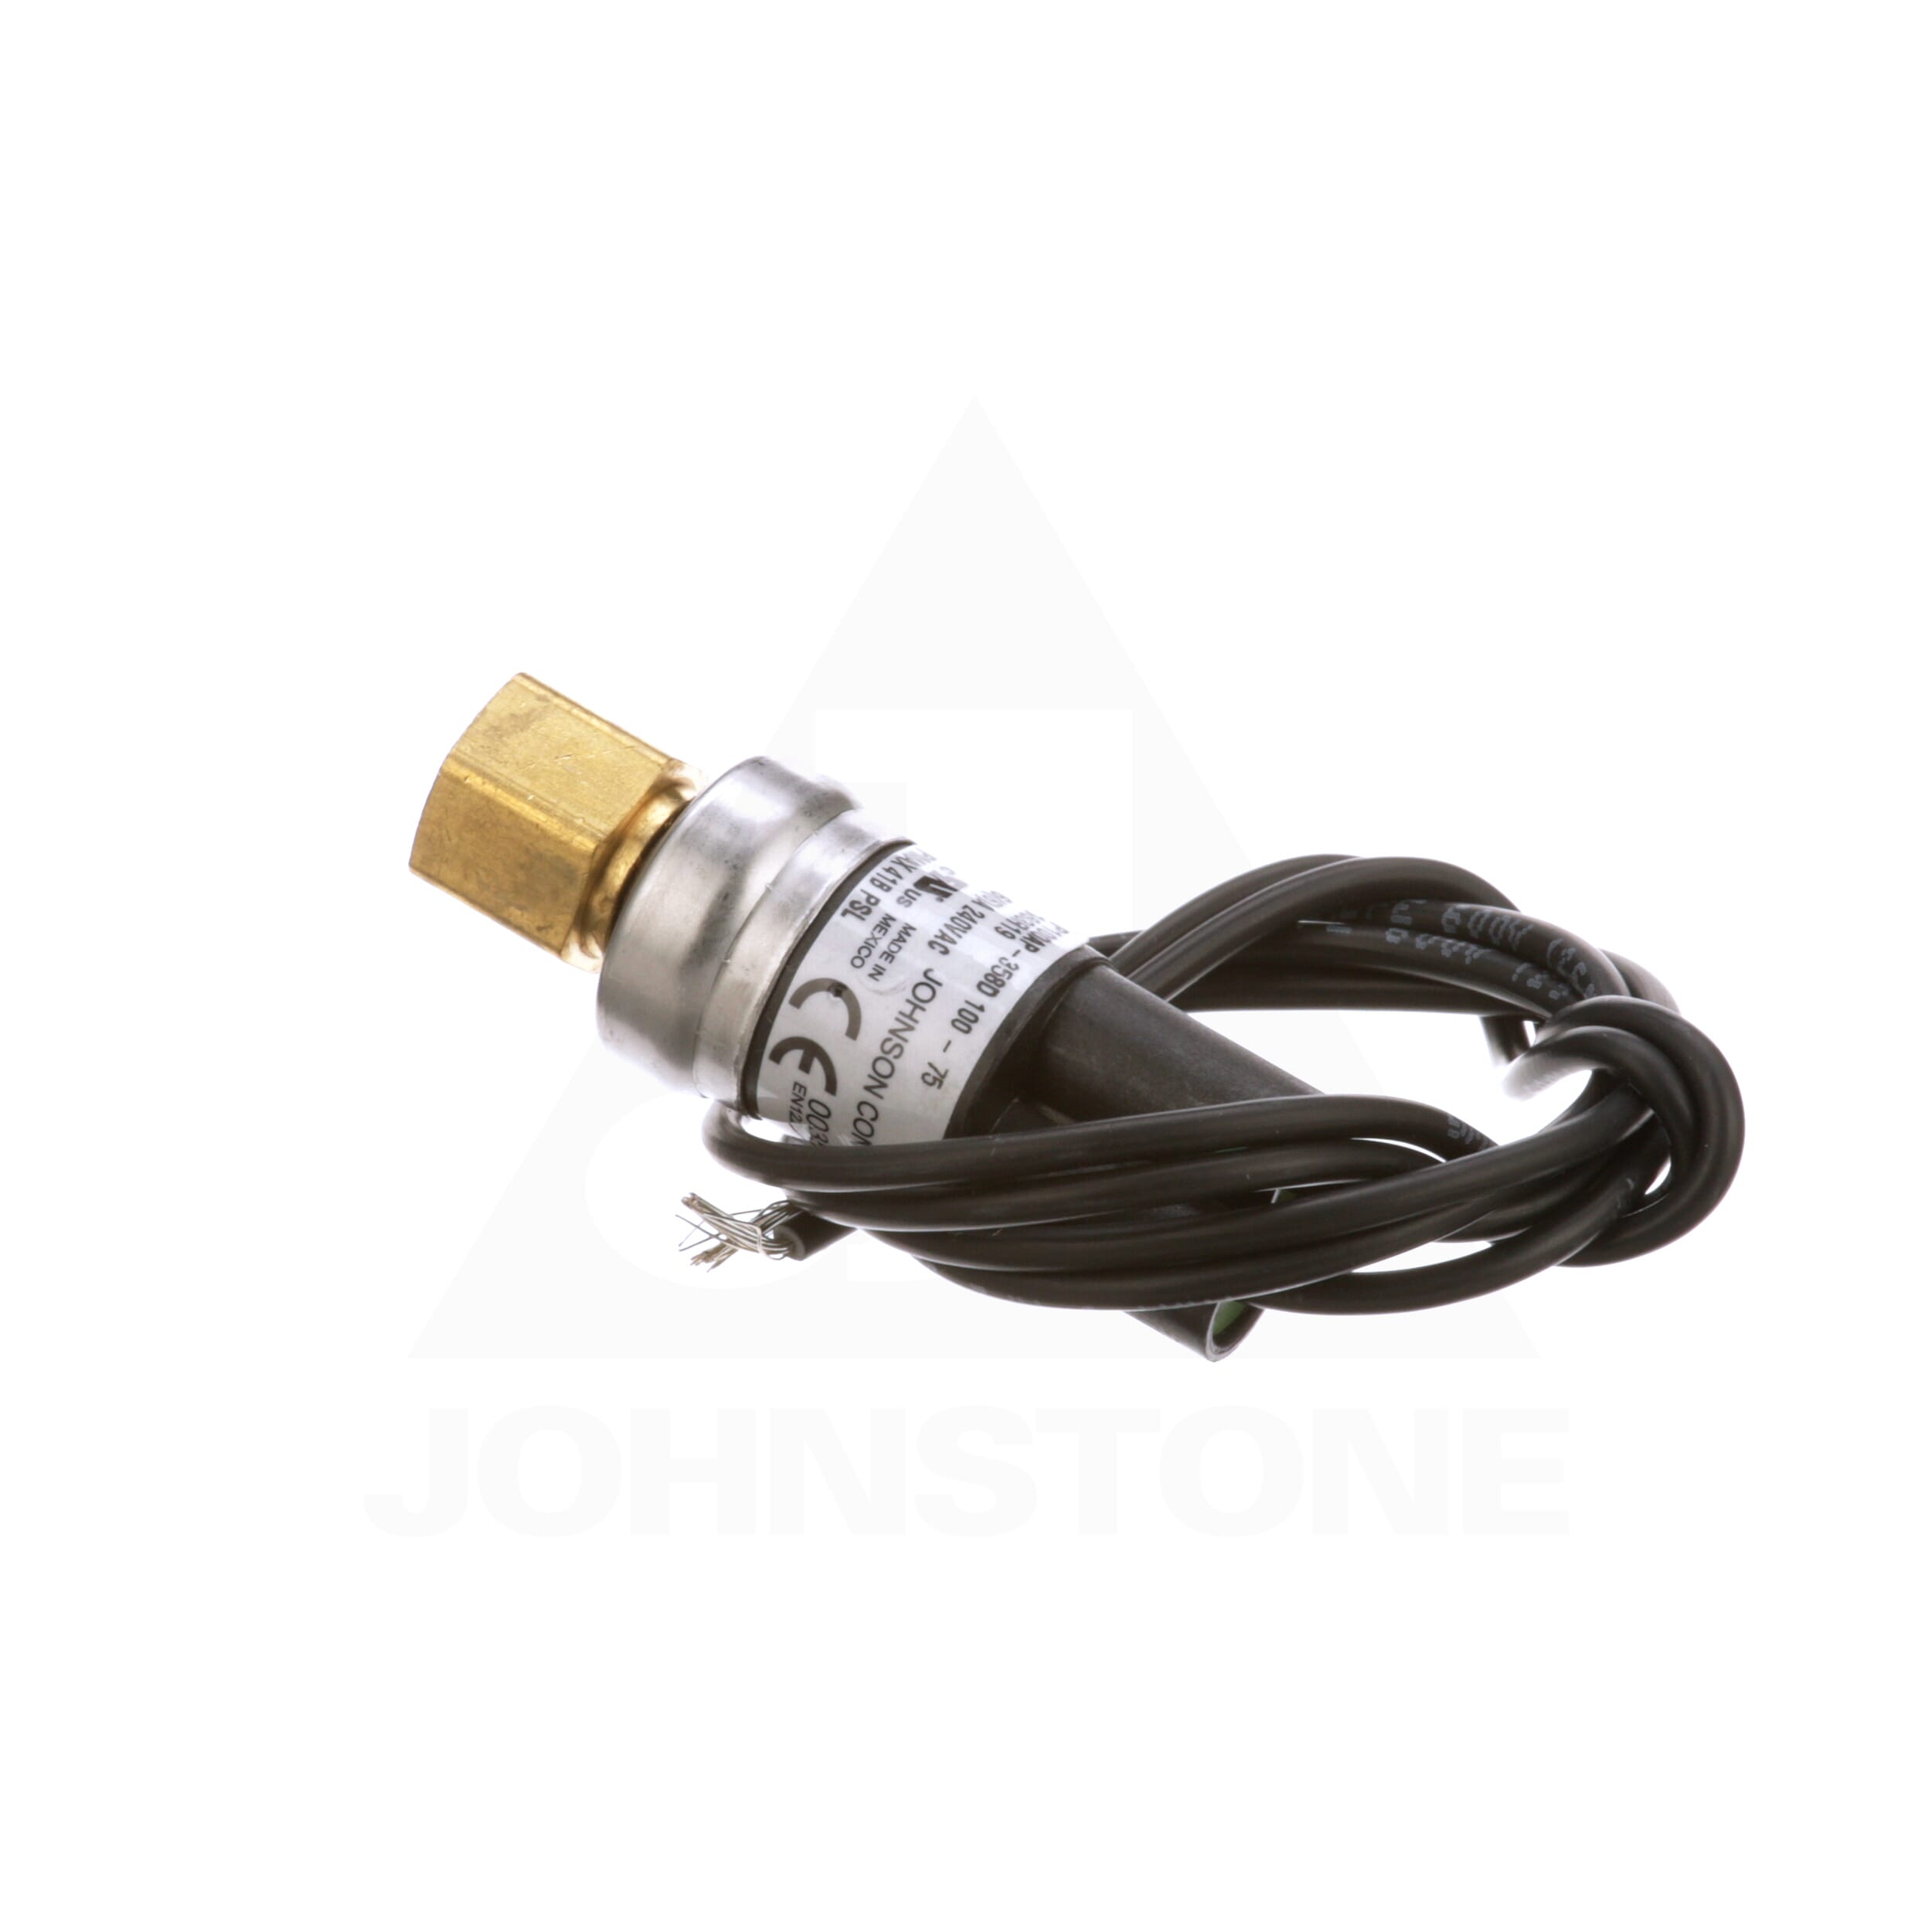 Open 600 reset 475 Details about   Johnson Controls 600/475 High Pressure Switch B18-810 New 